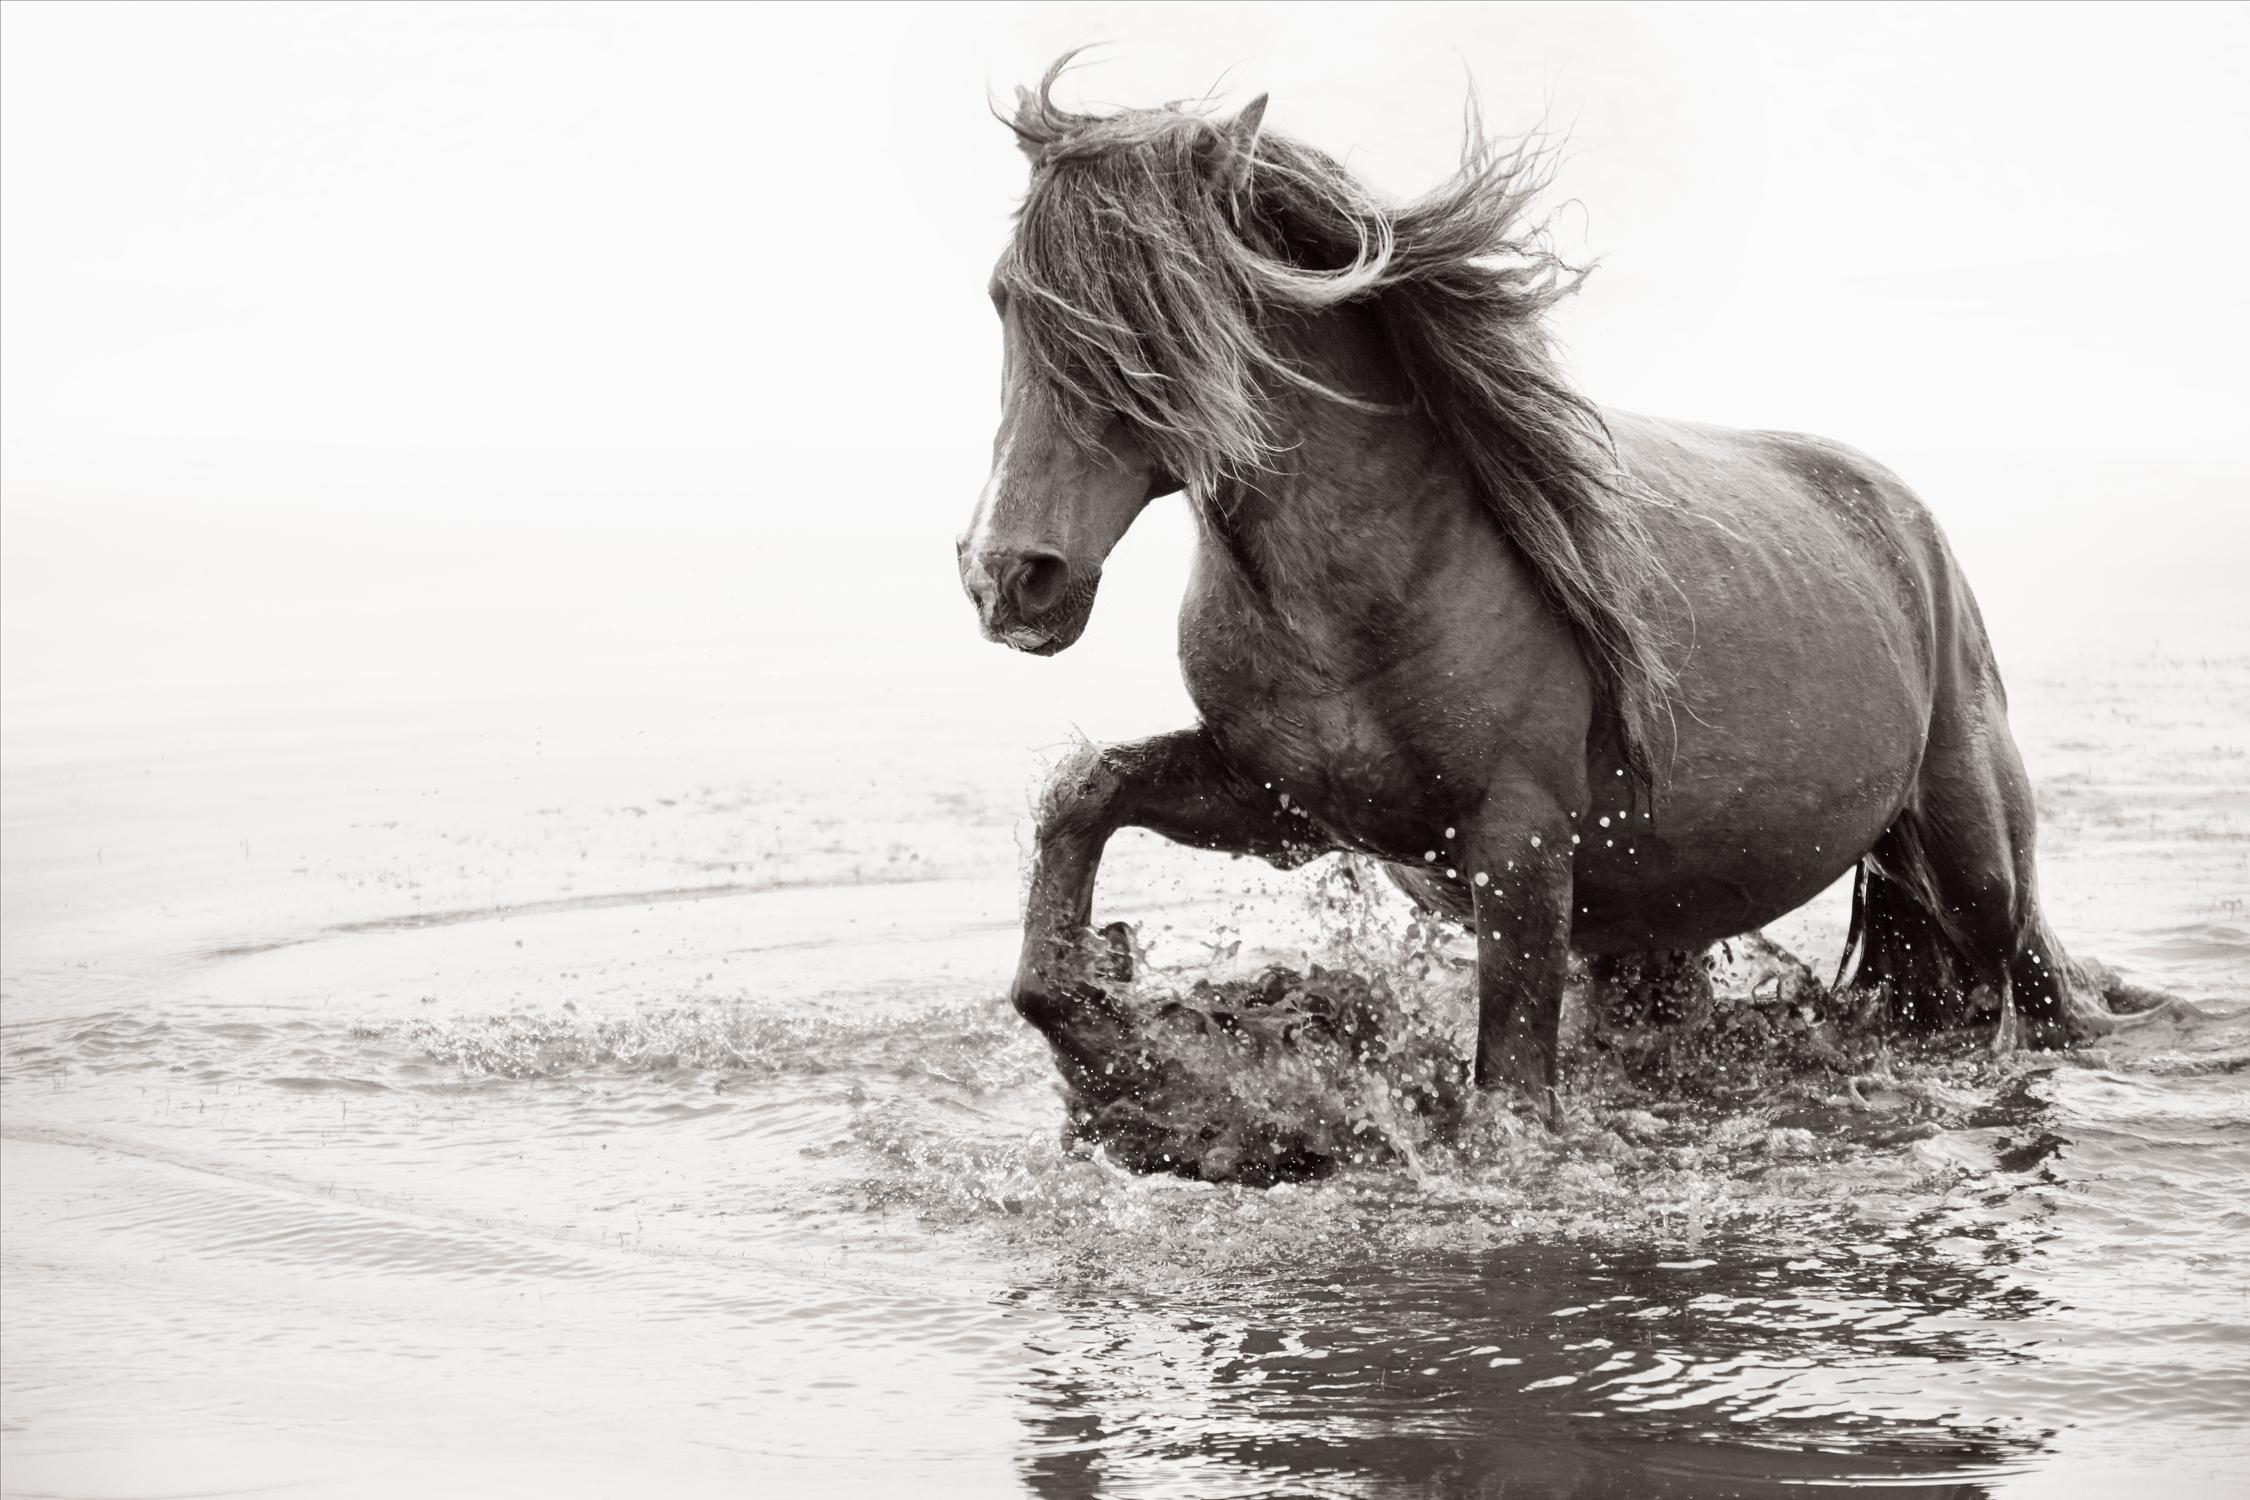 Drew Doggett Black and White Photograph - Wild Horse Walking Through Water with Mane Blowing in Wind, Best-Selling Print 